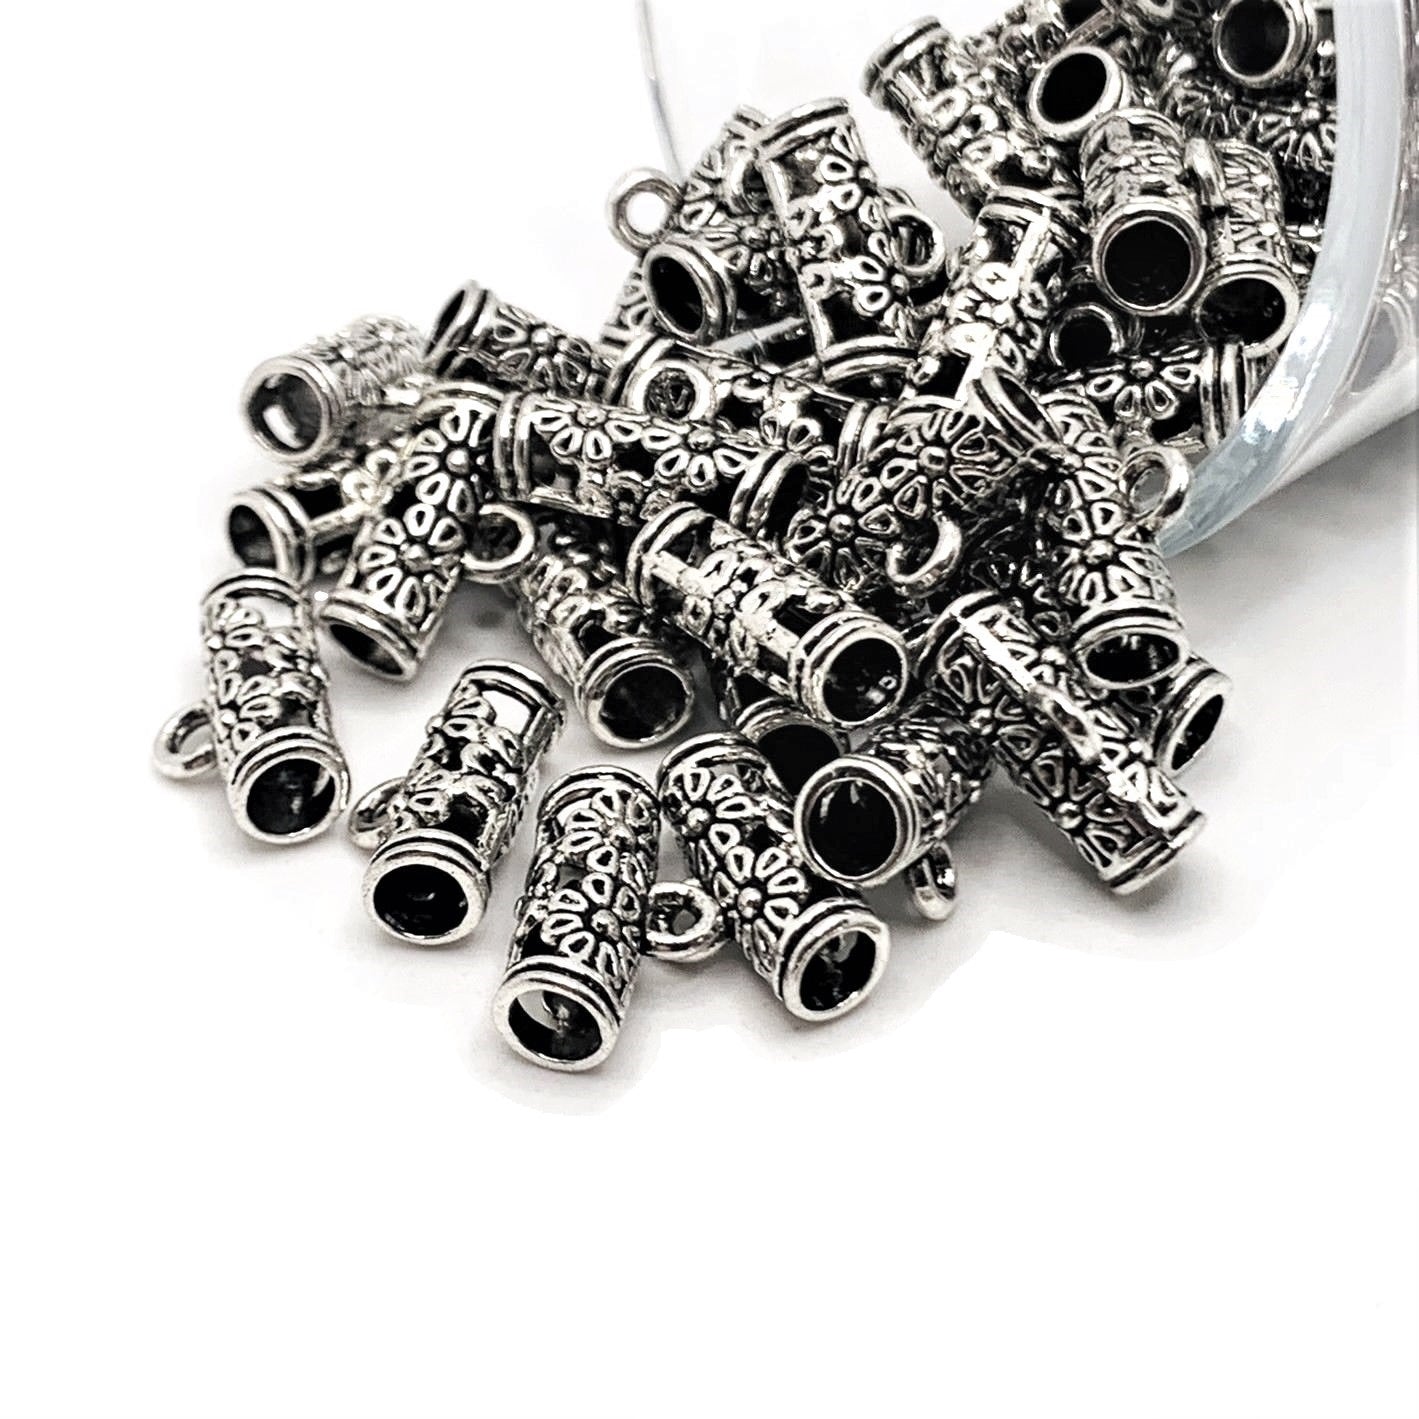 4, 20 or 50 Pieces: Silver Flowered Cylinder Bails